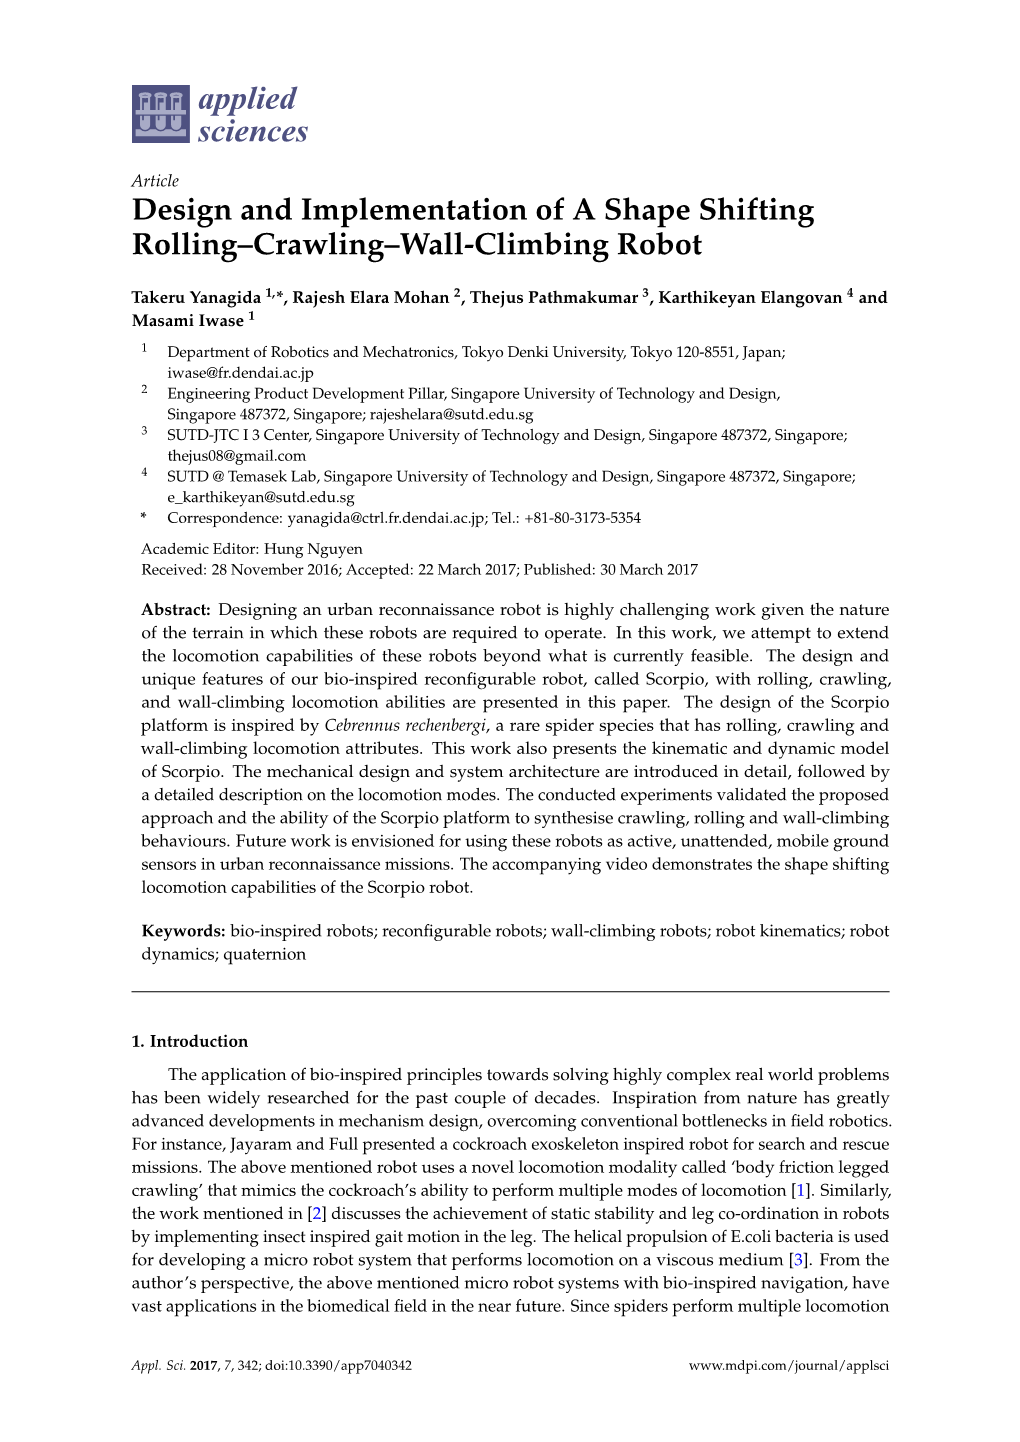 Design and Implementation of a Shape Shifting Rolling–Crawling–Wall-Climbing Robot